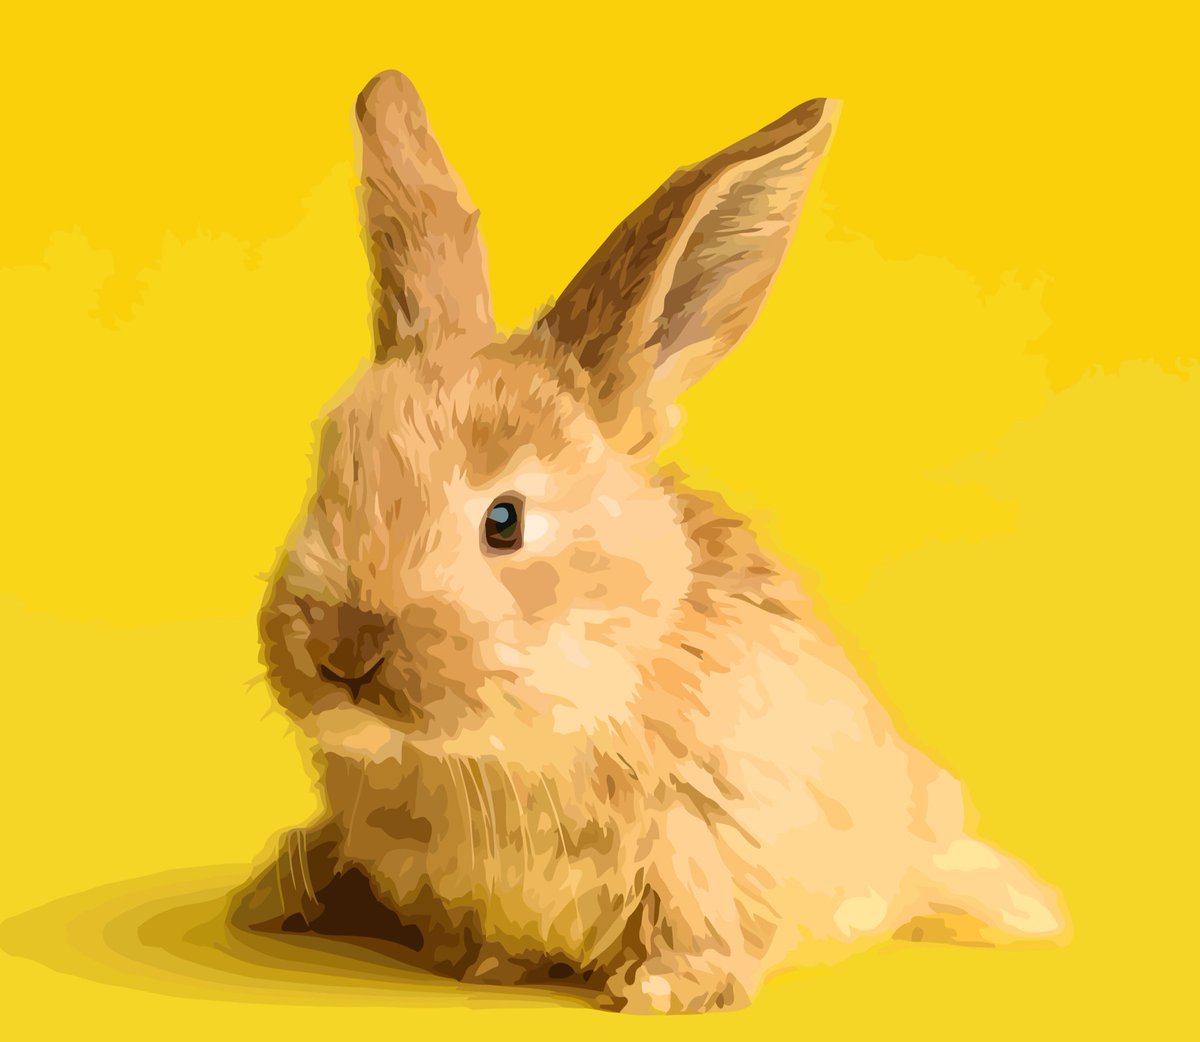 A sweet bunny i painted. #AllAnimalsMatter 💛💛💛